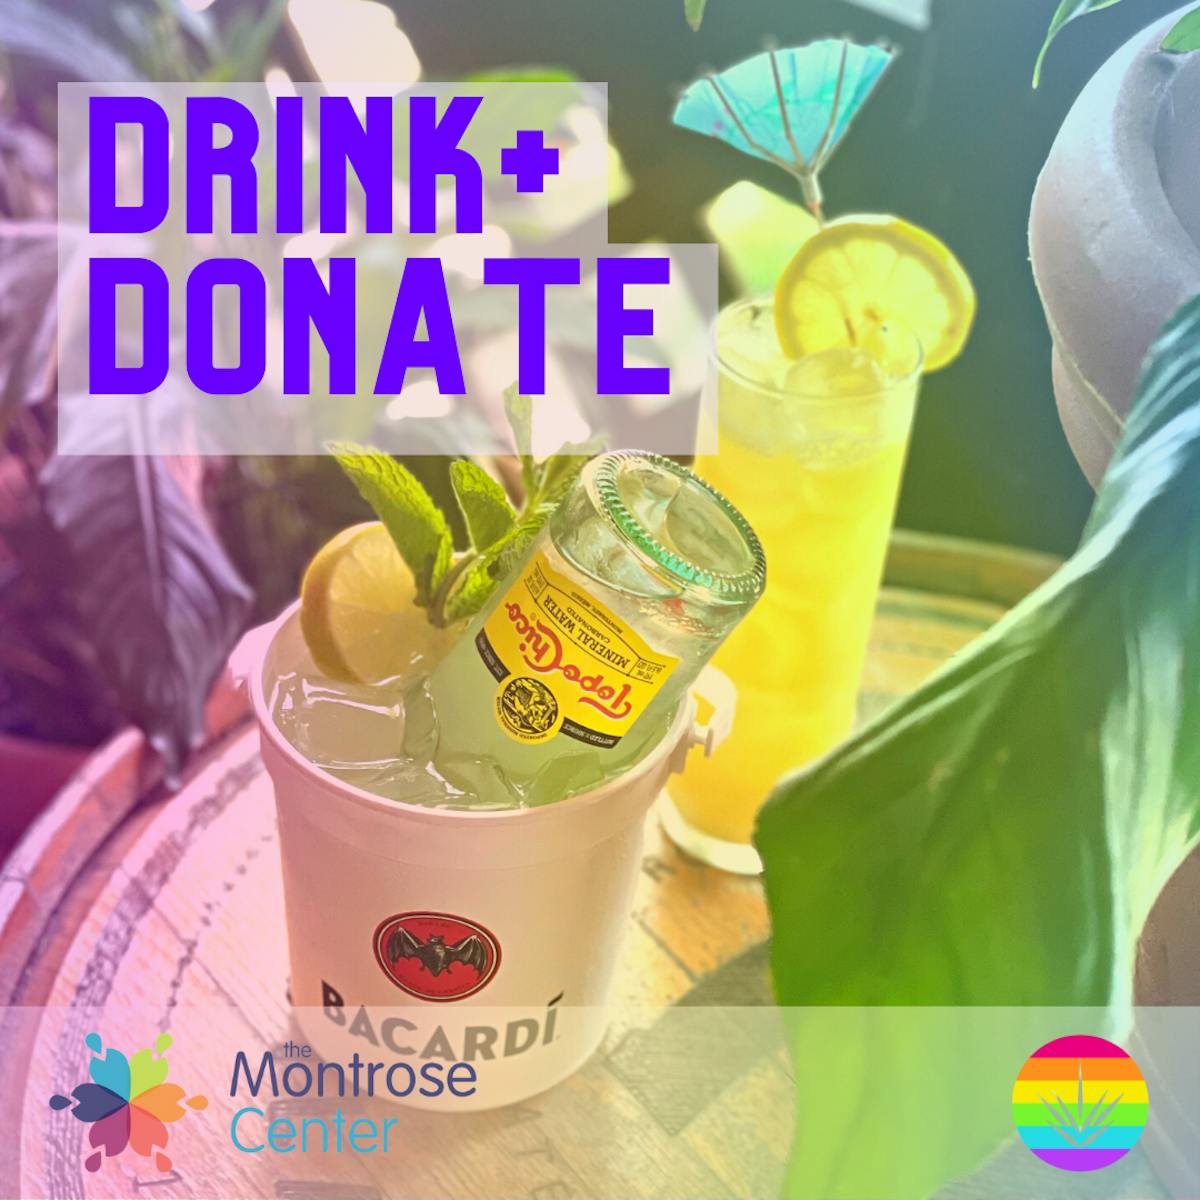 Two drinks featured on Arnaldo Richards' Picos Restaurant's Pride Cocktail Menu benefiting The Montrose Center in Houston, Texas throughout June 2022